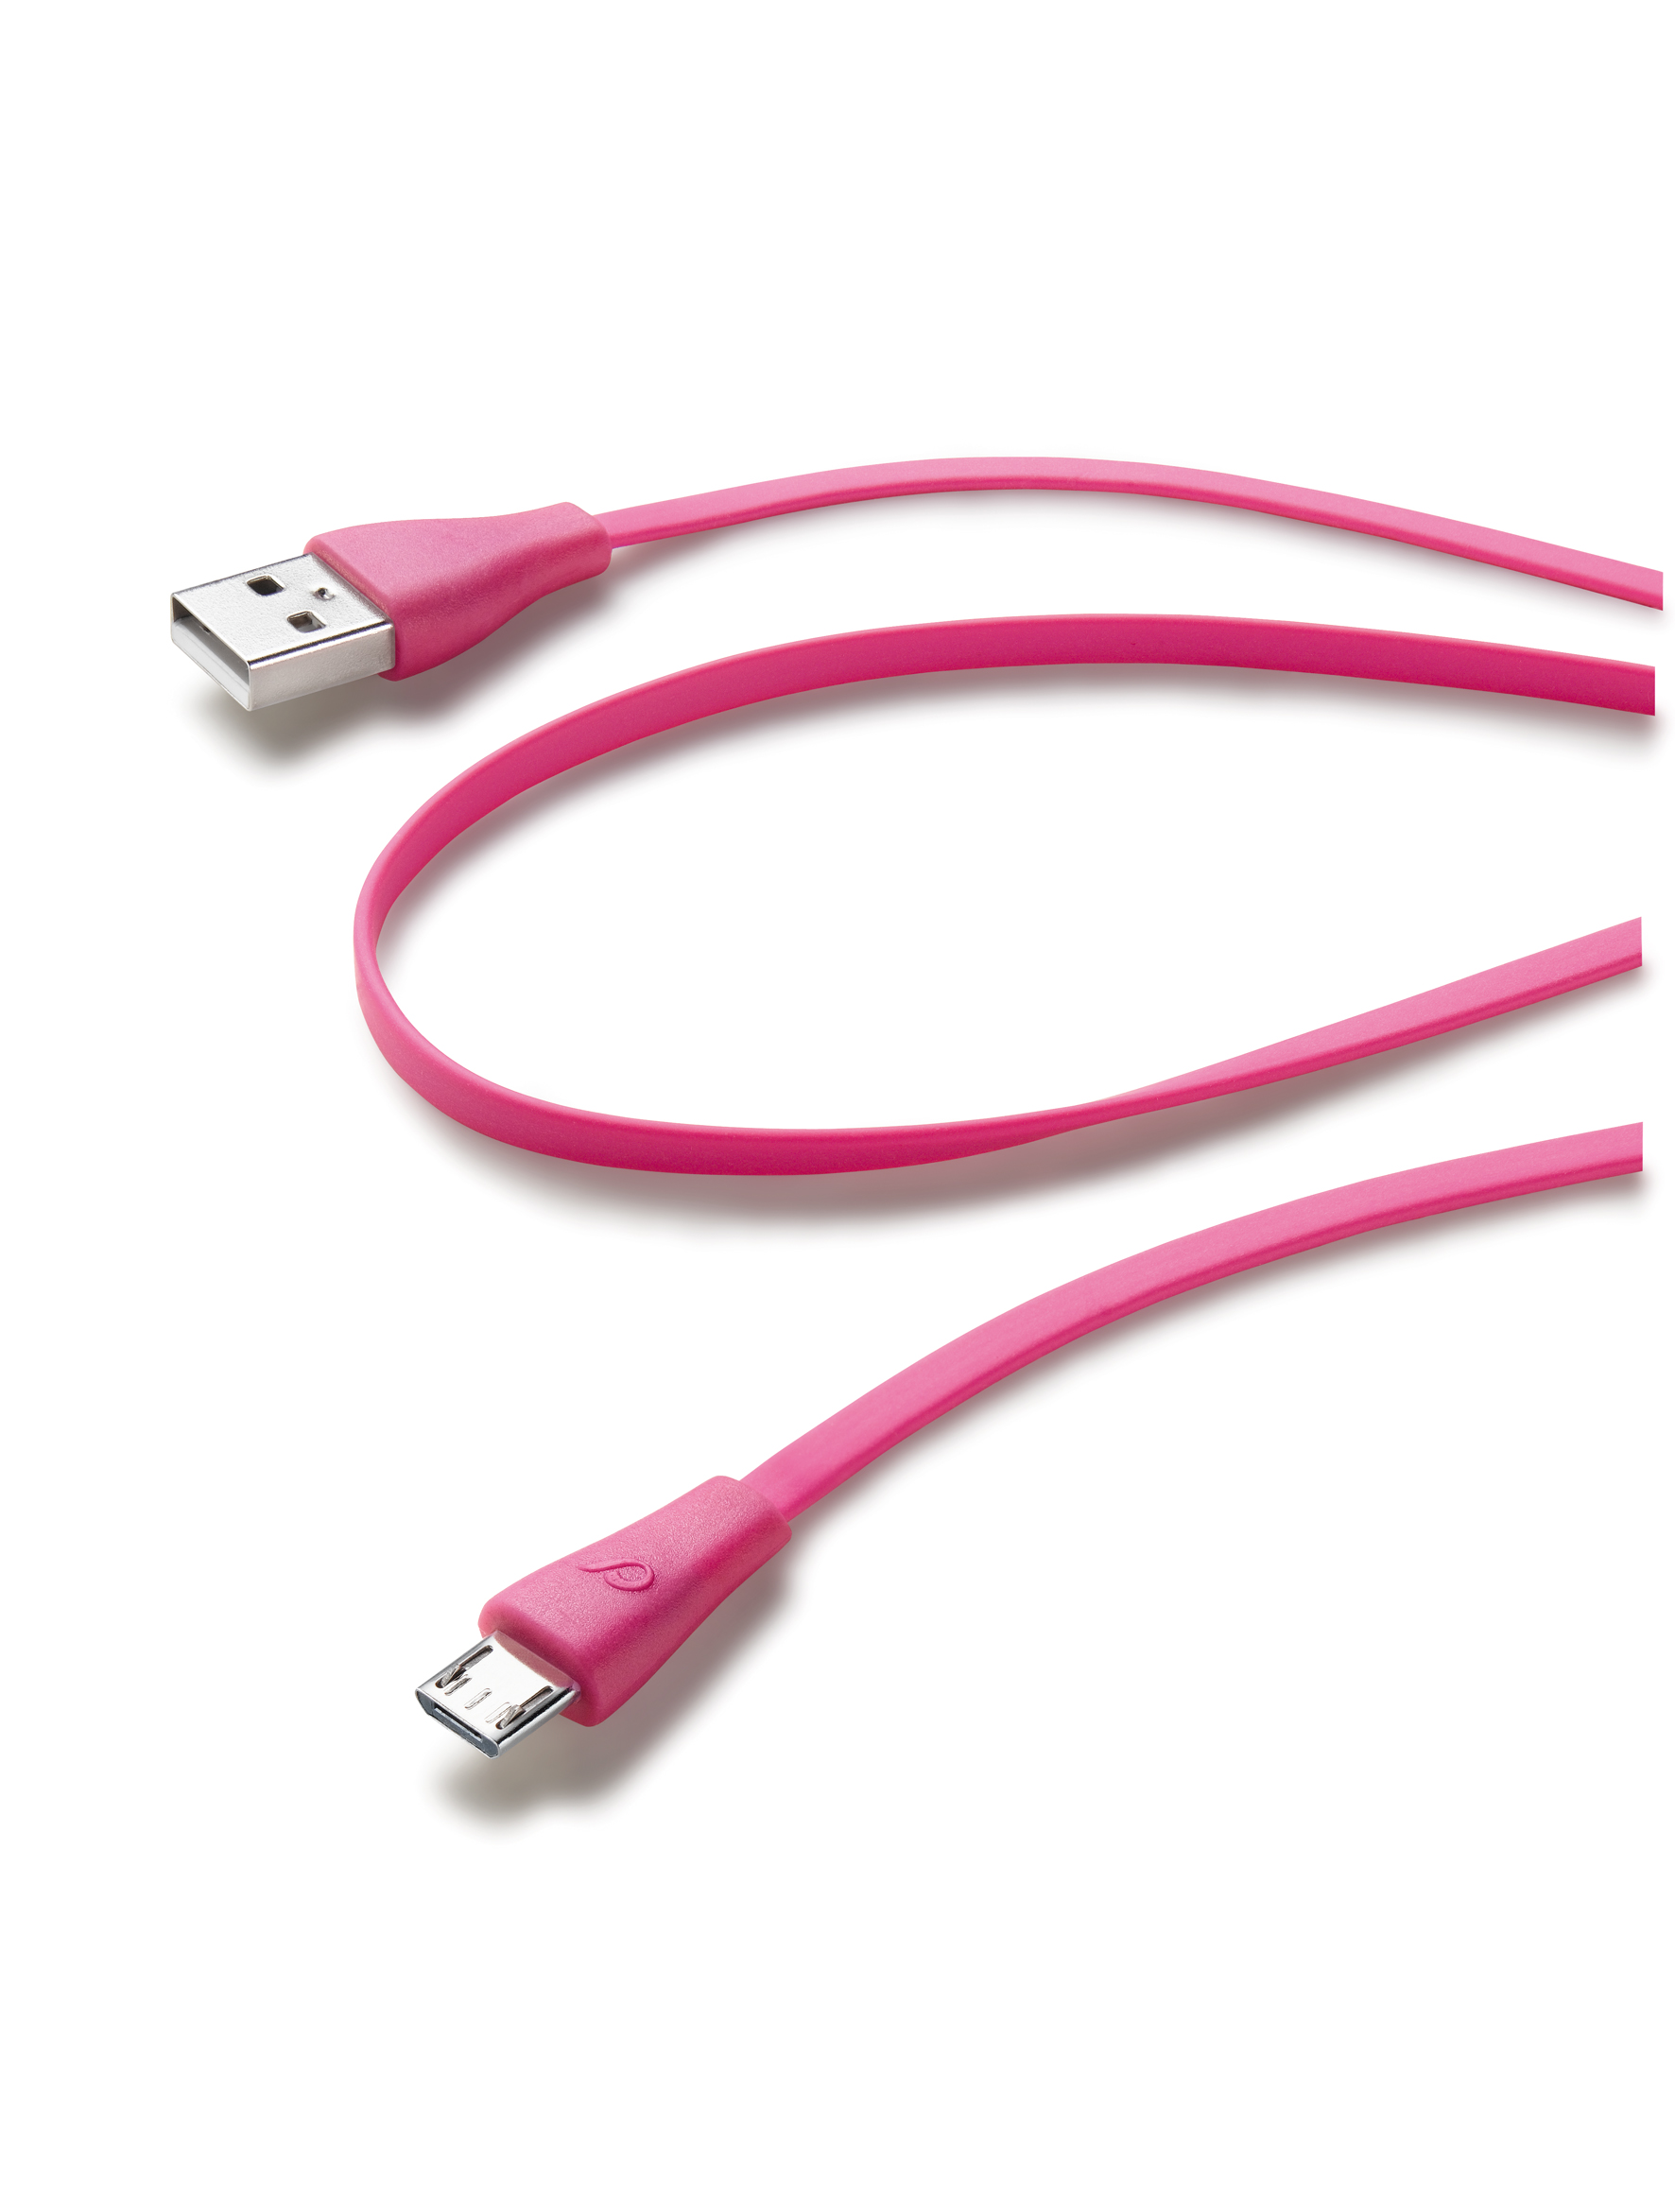 Data cable, micro-usb flat, pink